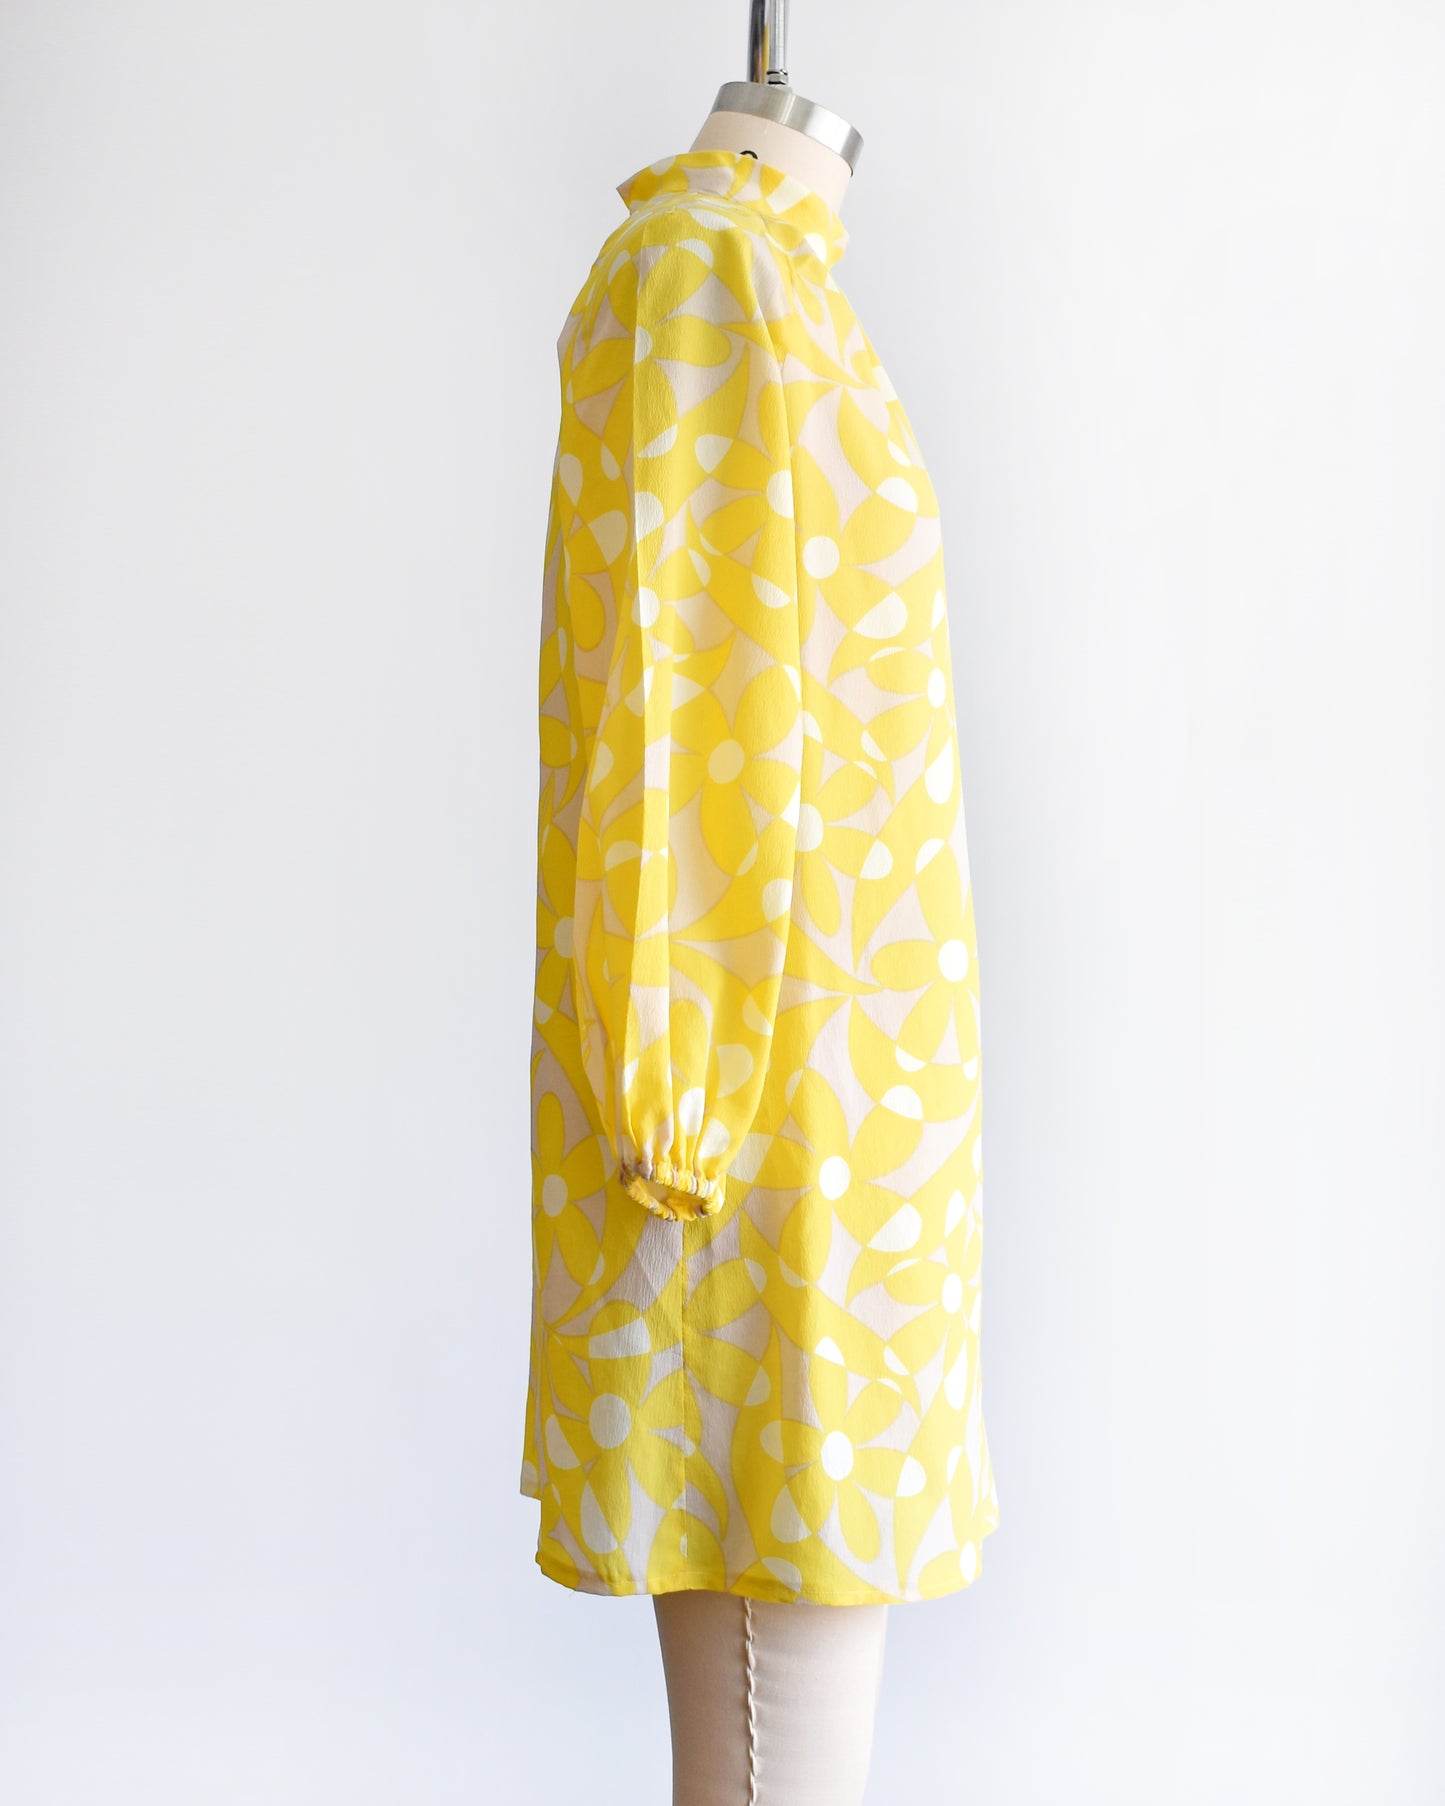 Side view of a vintage 1960s mod mini dress features a bright yellow and white floral pattern with swirls, set on a pale beige background. 